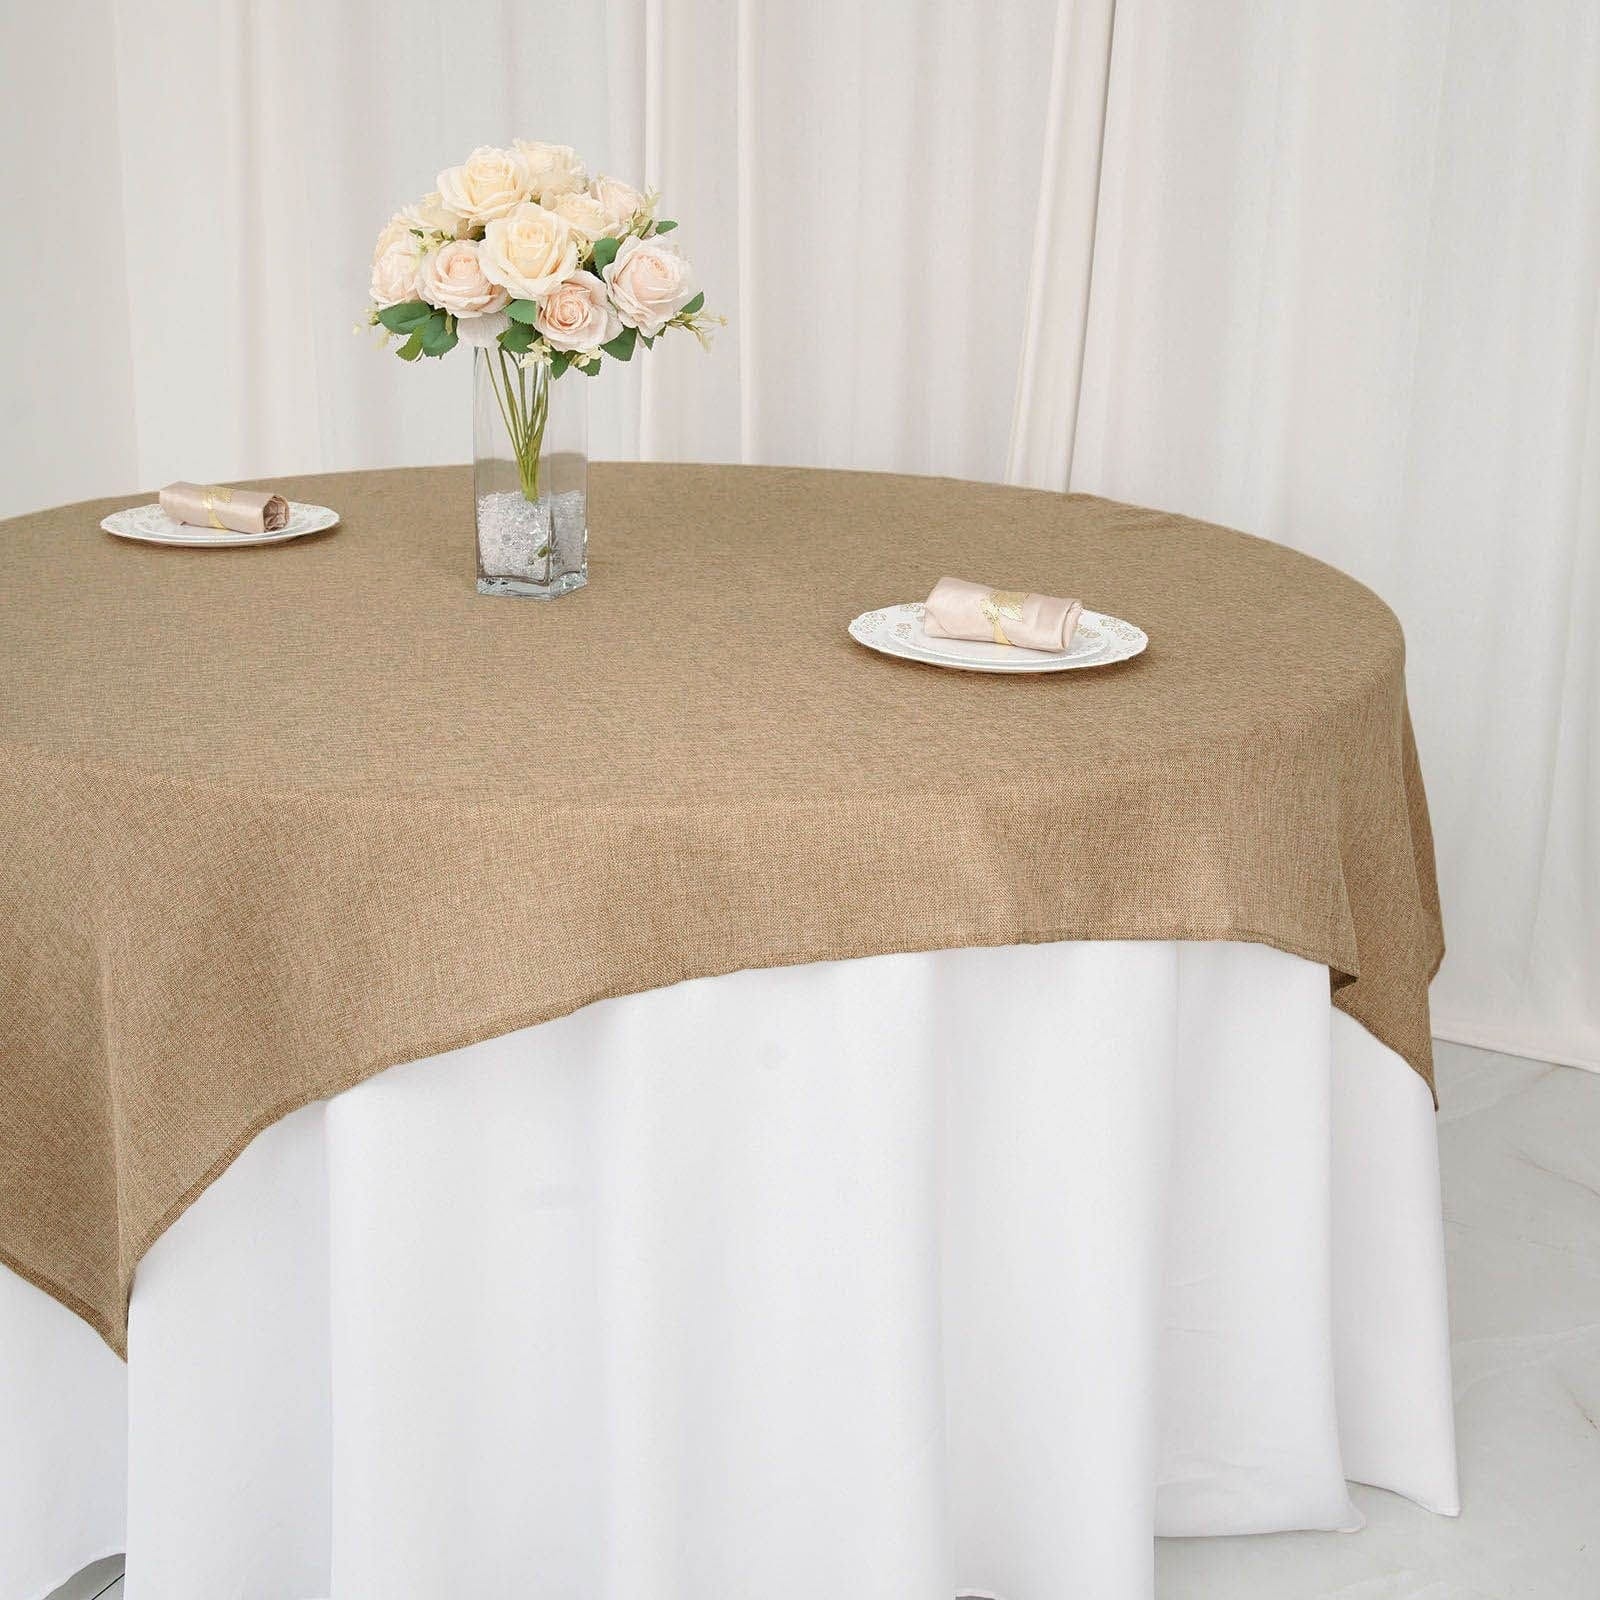 72 inch Natural Faux Burlap Square Table Overlay